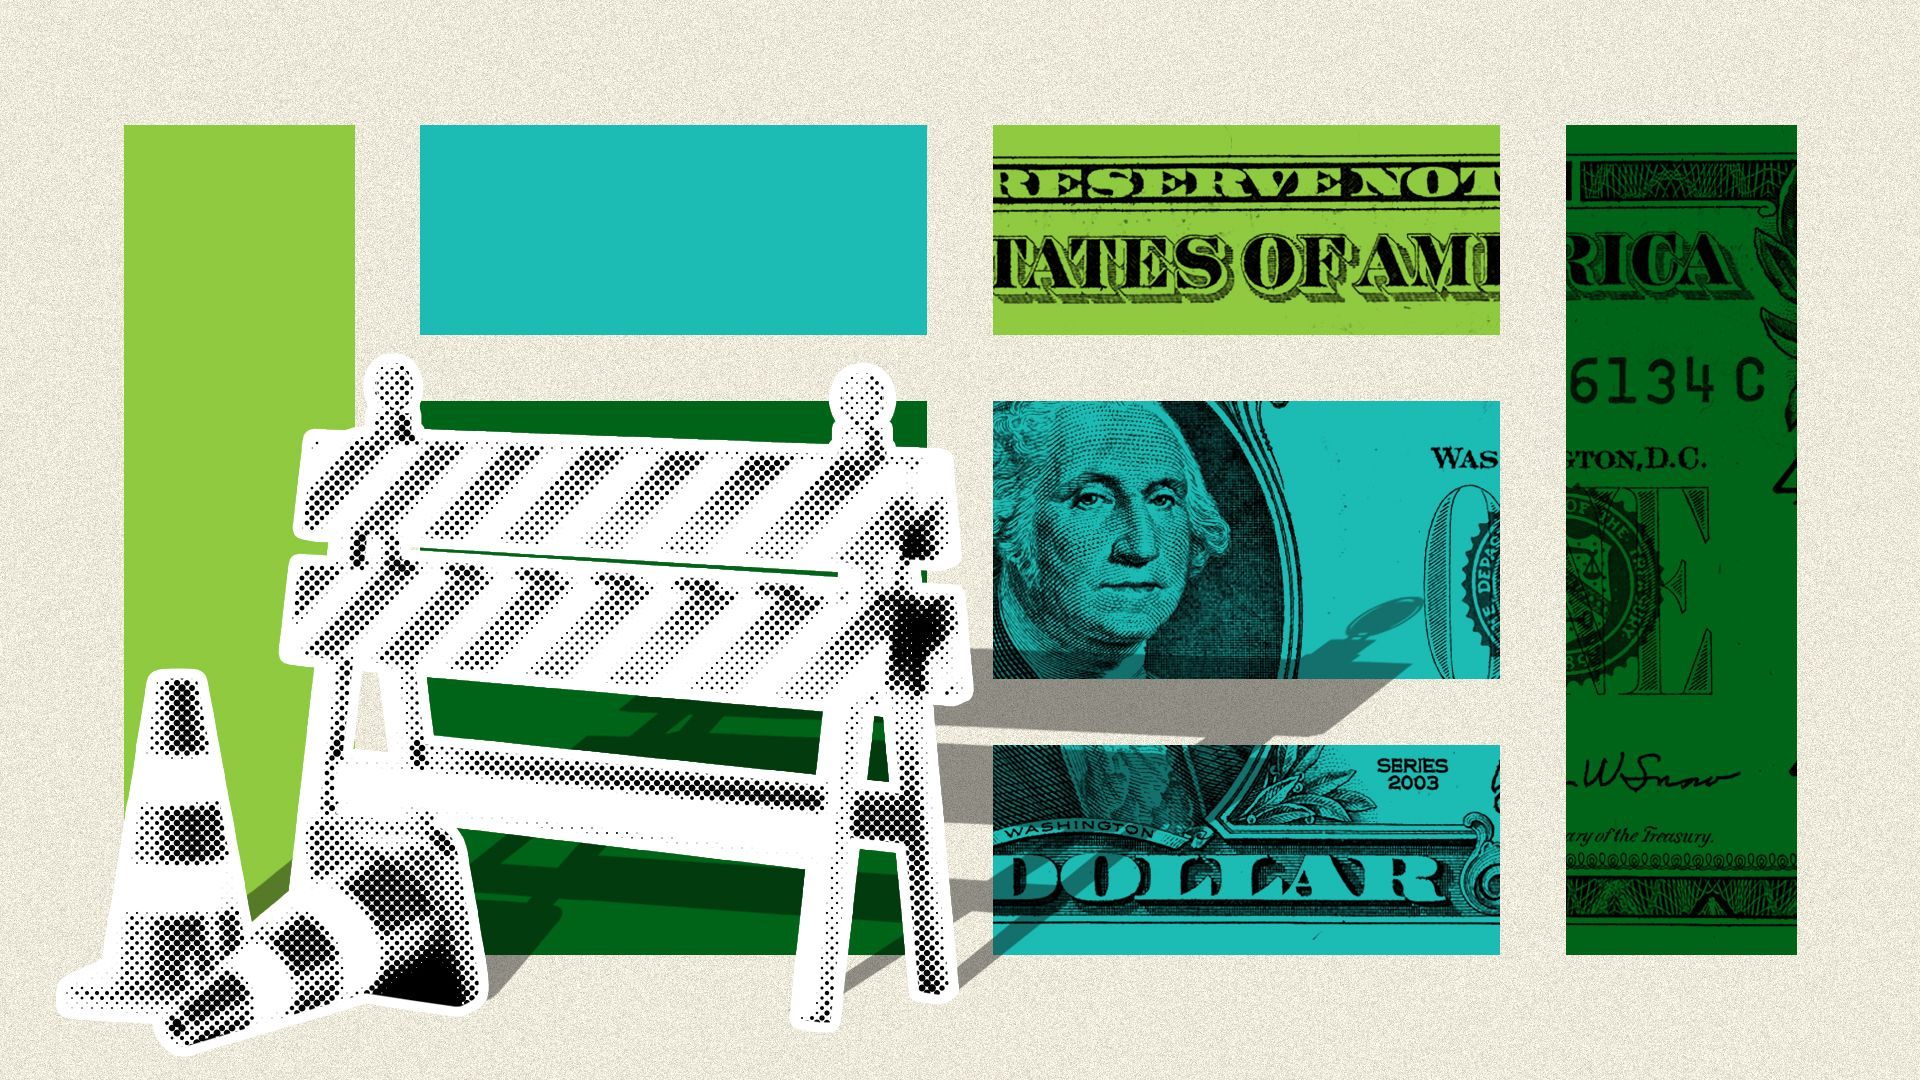 Illustration of a construction barrier and traffic cones in front of a broken up dollar bill.